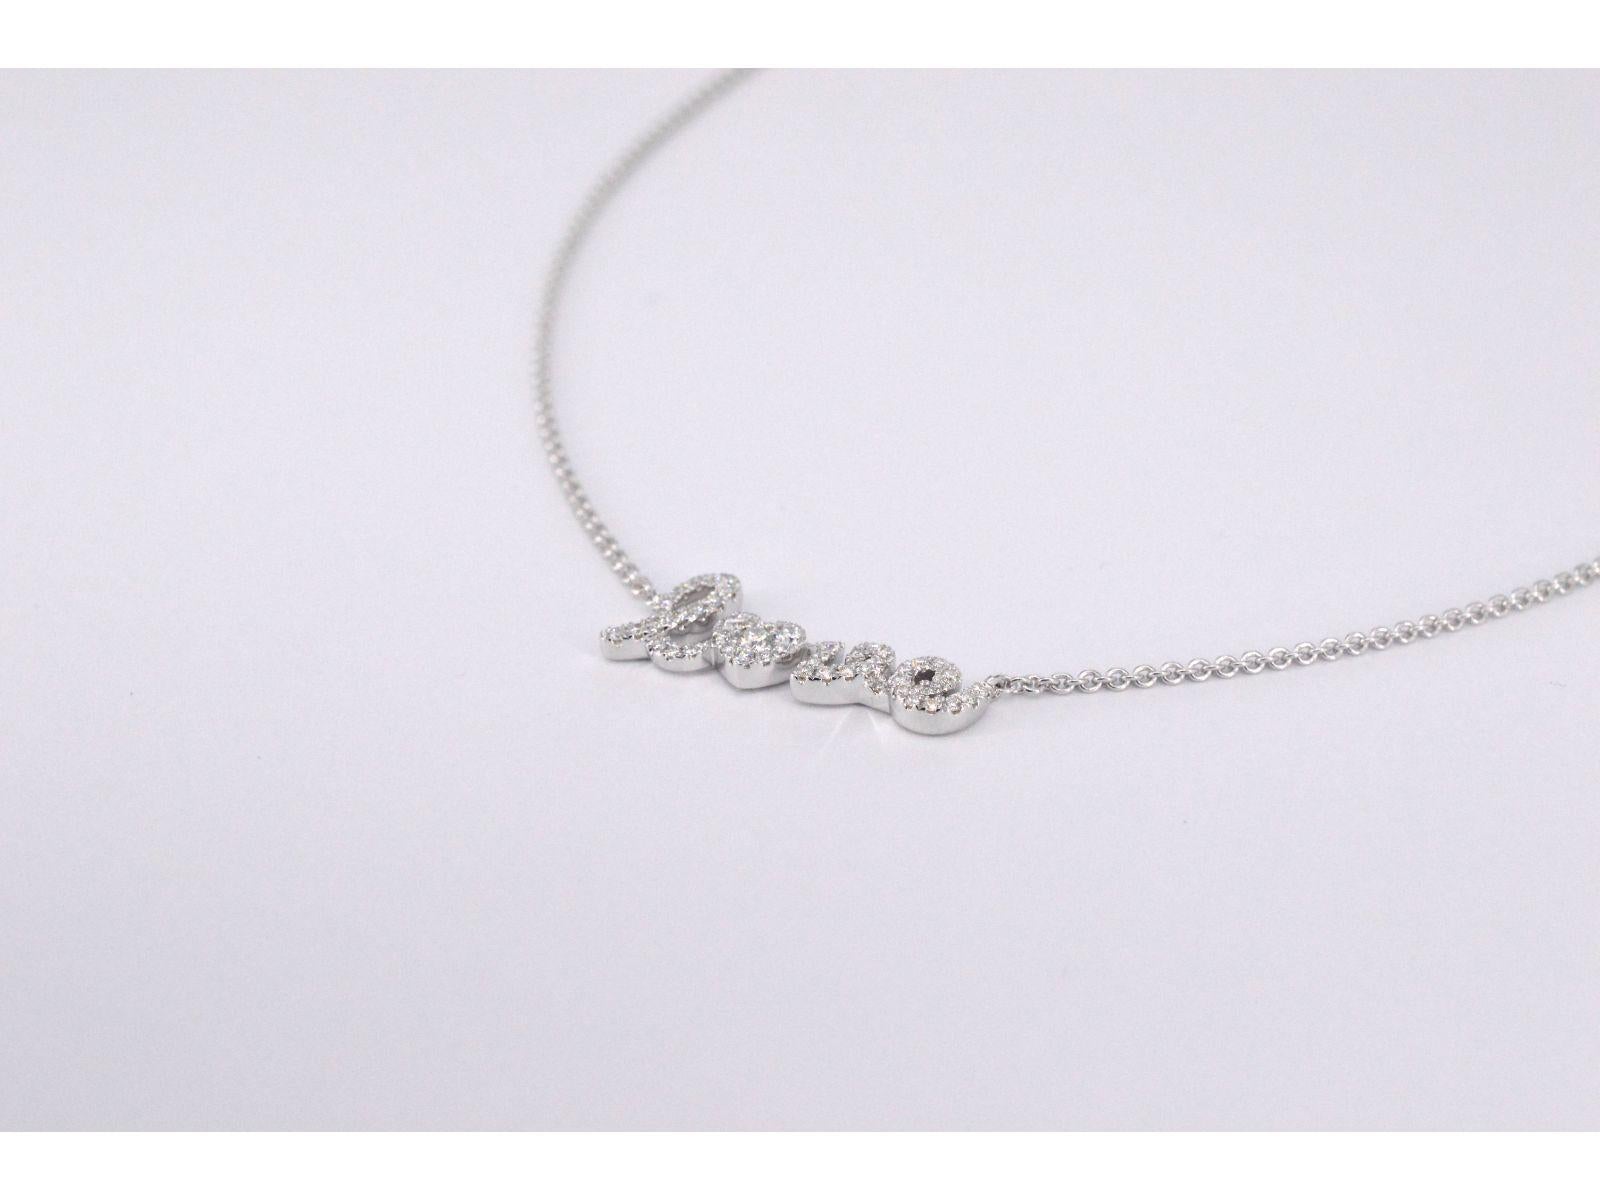 Women's White Gold 'Love' Necklace with Diamonds